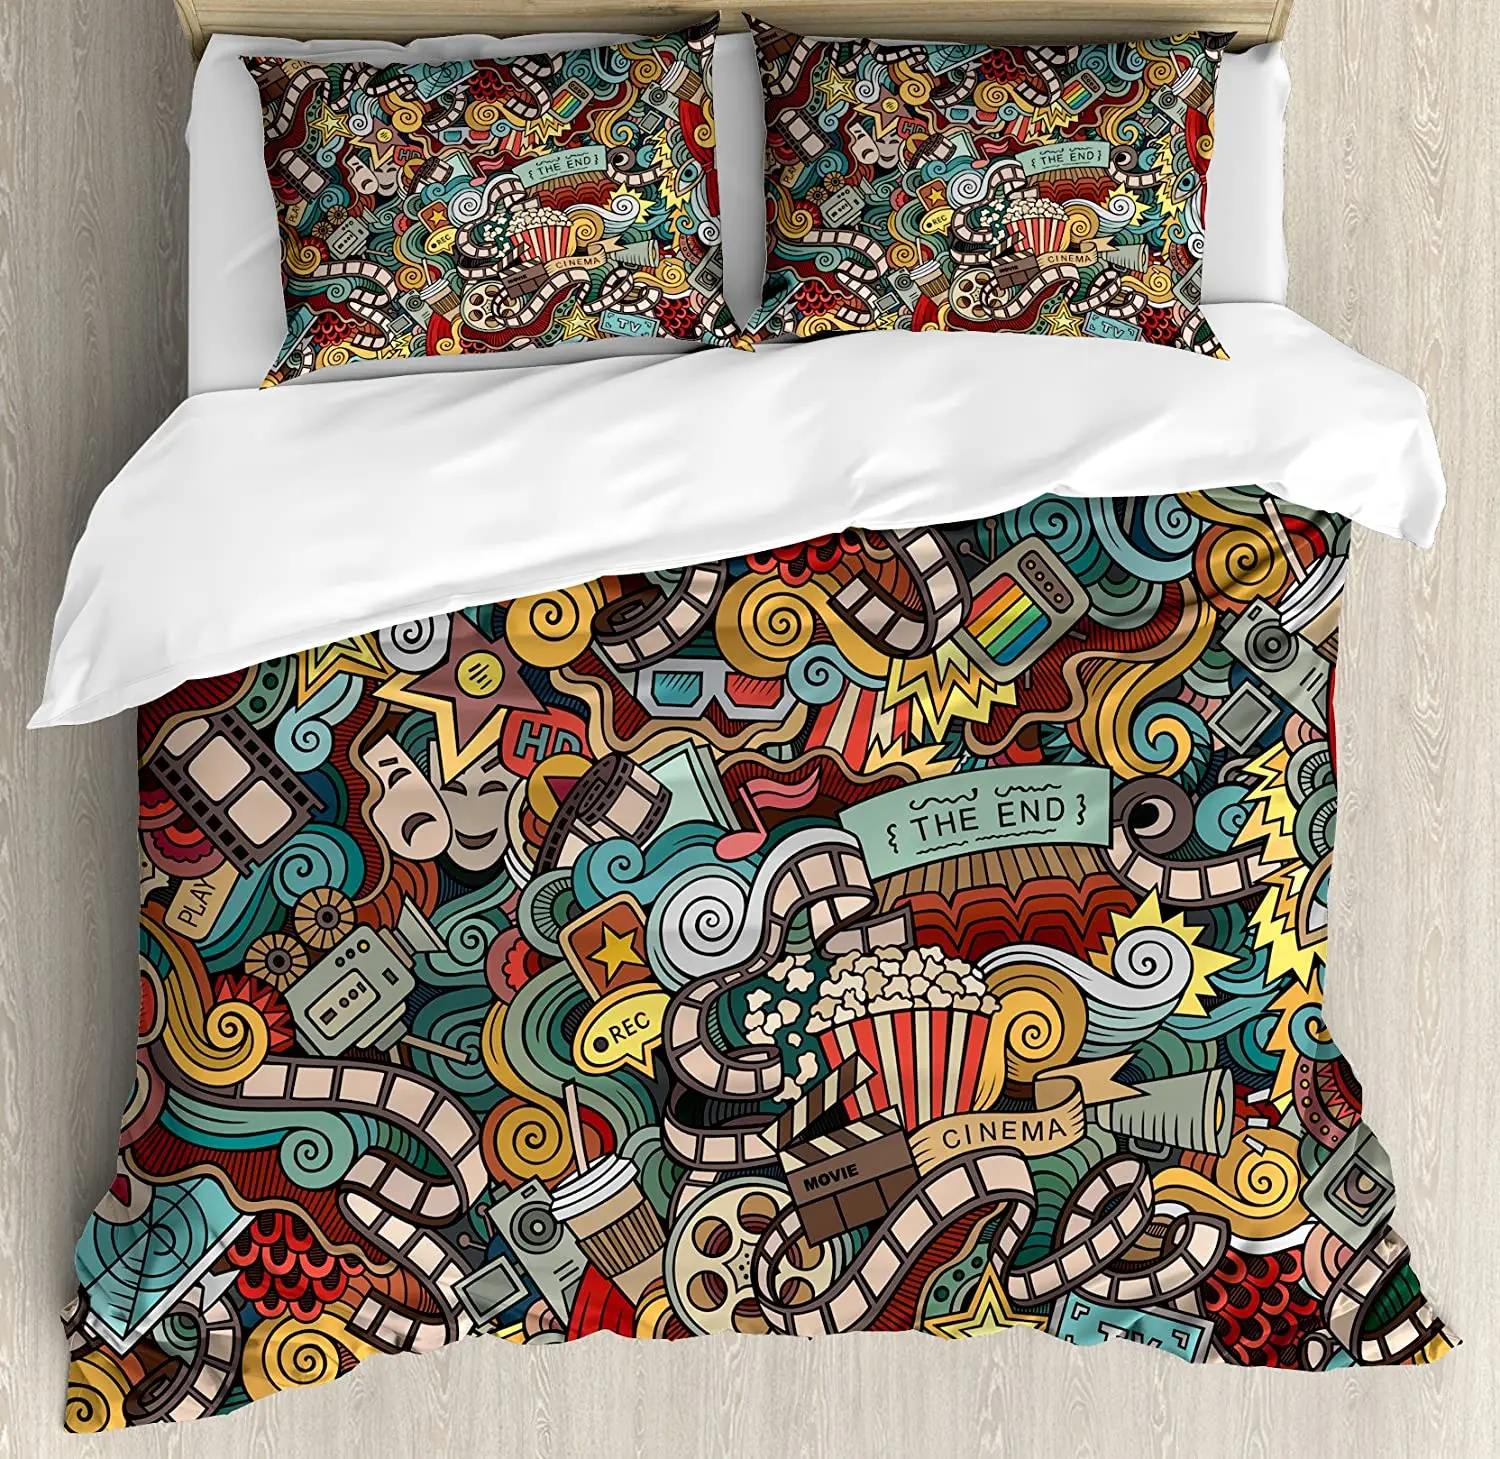 

Doodle Bedding Set For Bedroom Bed Home Cinema Items Combined in an Abstract Style Popcor Duvet Cover Quilt Cover And Pillowcase